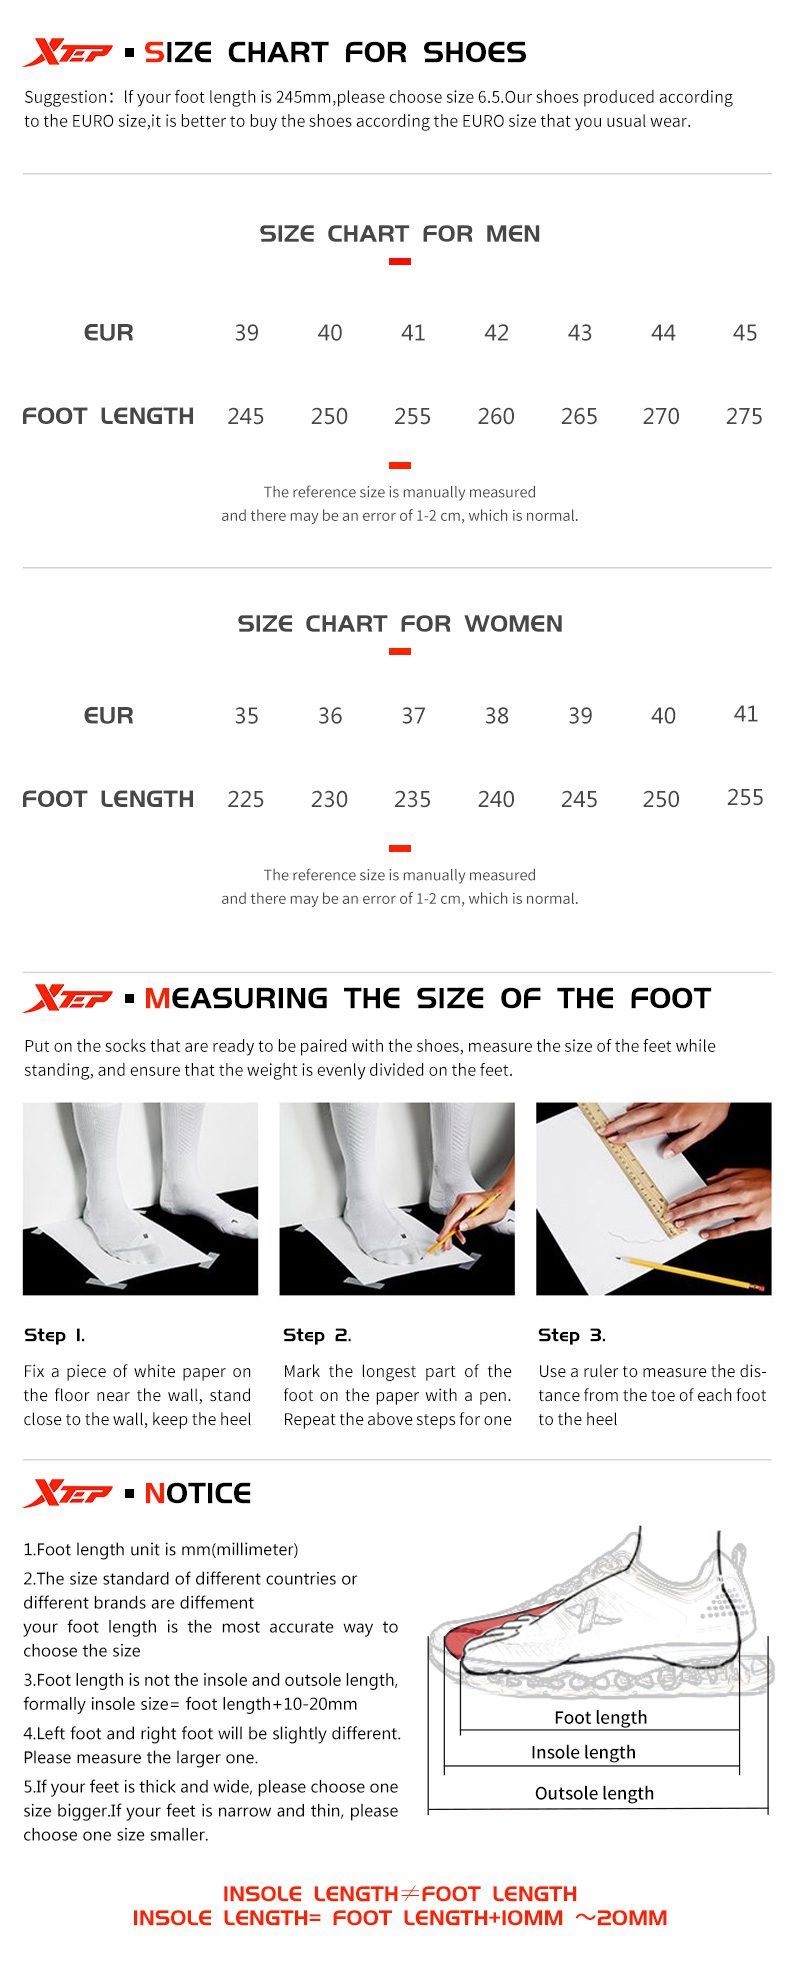 Xtep 70S Liangzhu Shoes For Men Summer Breathable Casual Sneakers For Men 2022 Fashion Comfortable Sports Shoes 878219320023